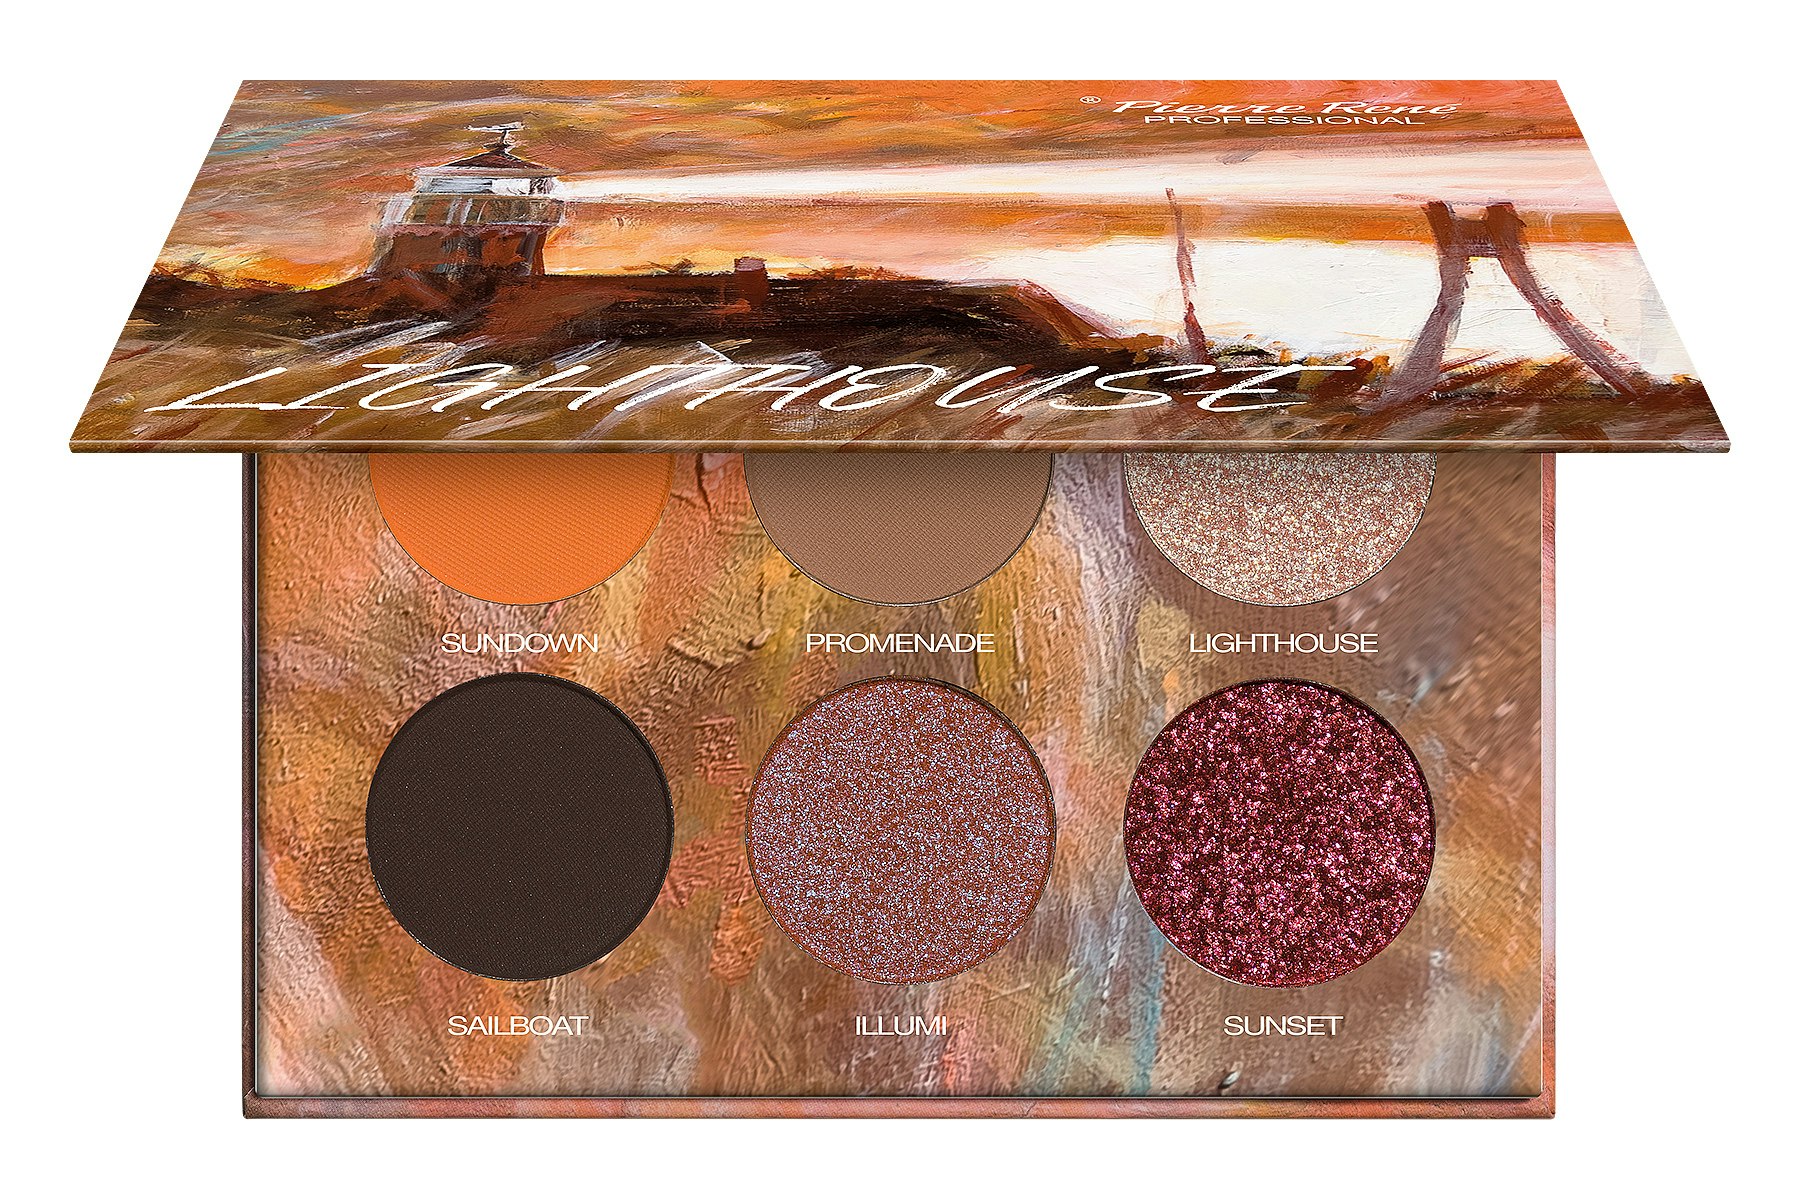 Pierre René Eyeshadow Palette Limited Edition Lighthouse